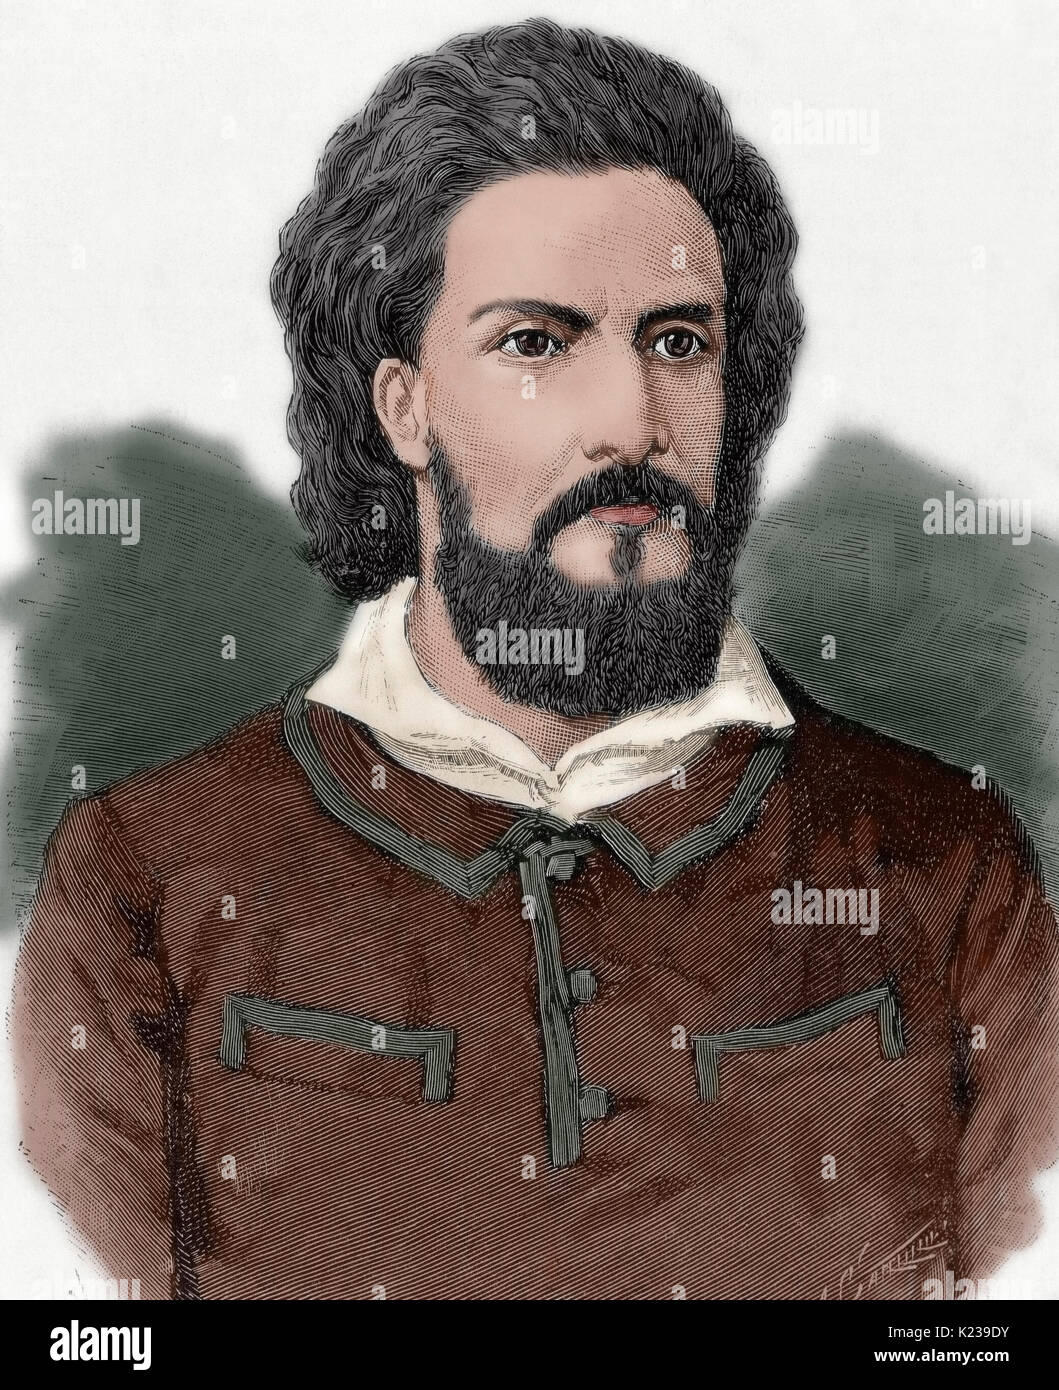 Alexandre de Serpa Pinto, Viscount of Serpa Pinto (1846-1900). Portuguese explorer of southern Africa and a colonial administrator. Portrait. Engraving. Colored. Stock Photo